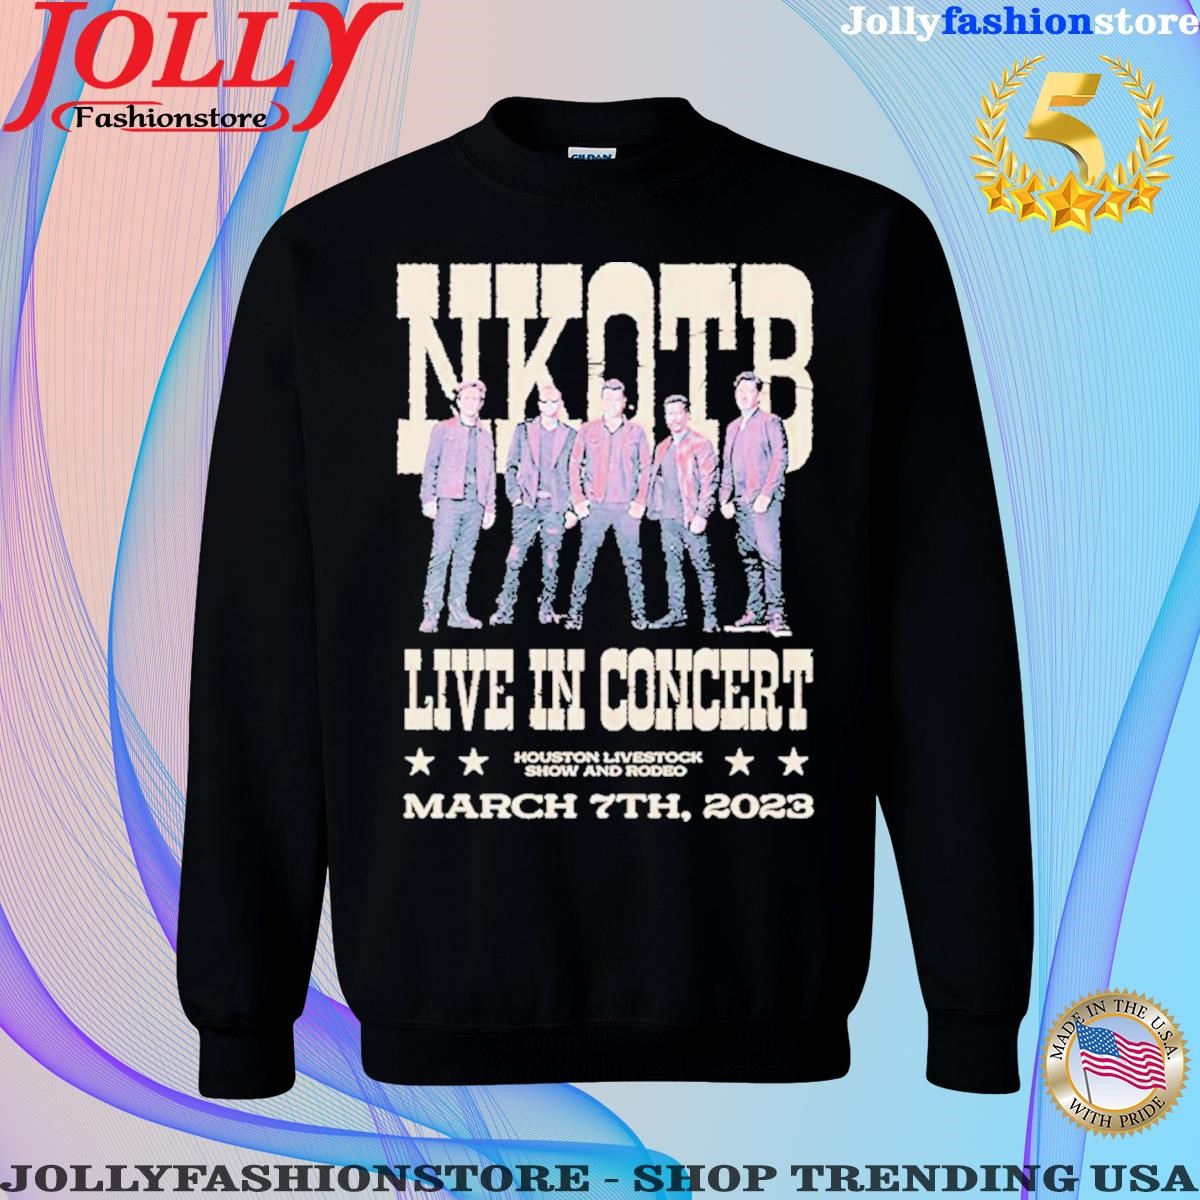 Nkotb live in concert houston livestock show and rodeo march 7th 2023 shirt Sweatshirt.png